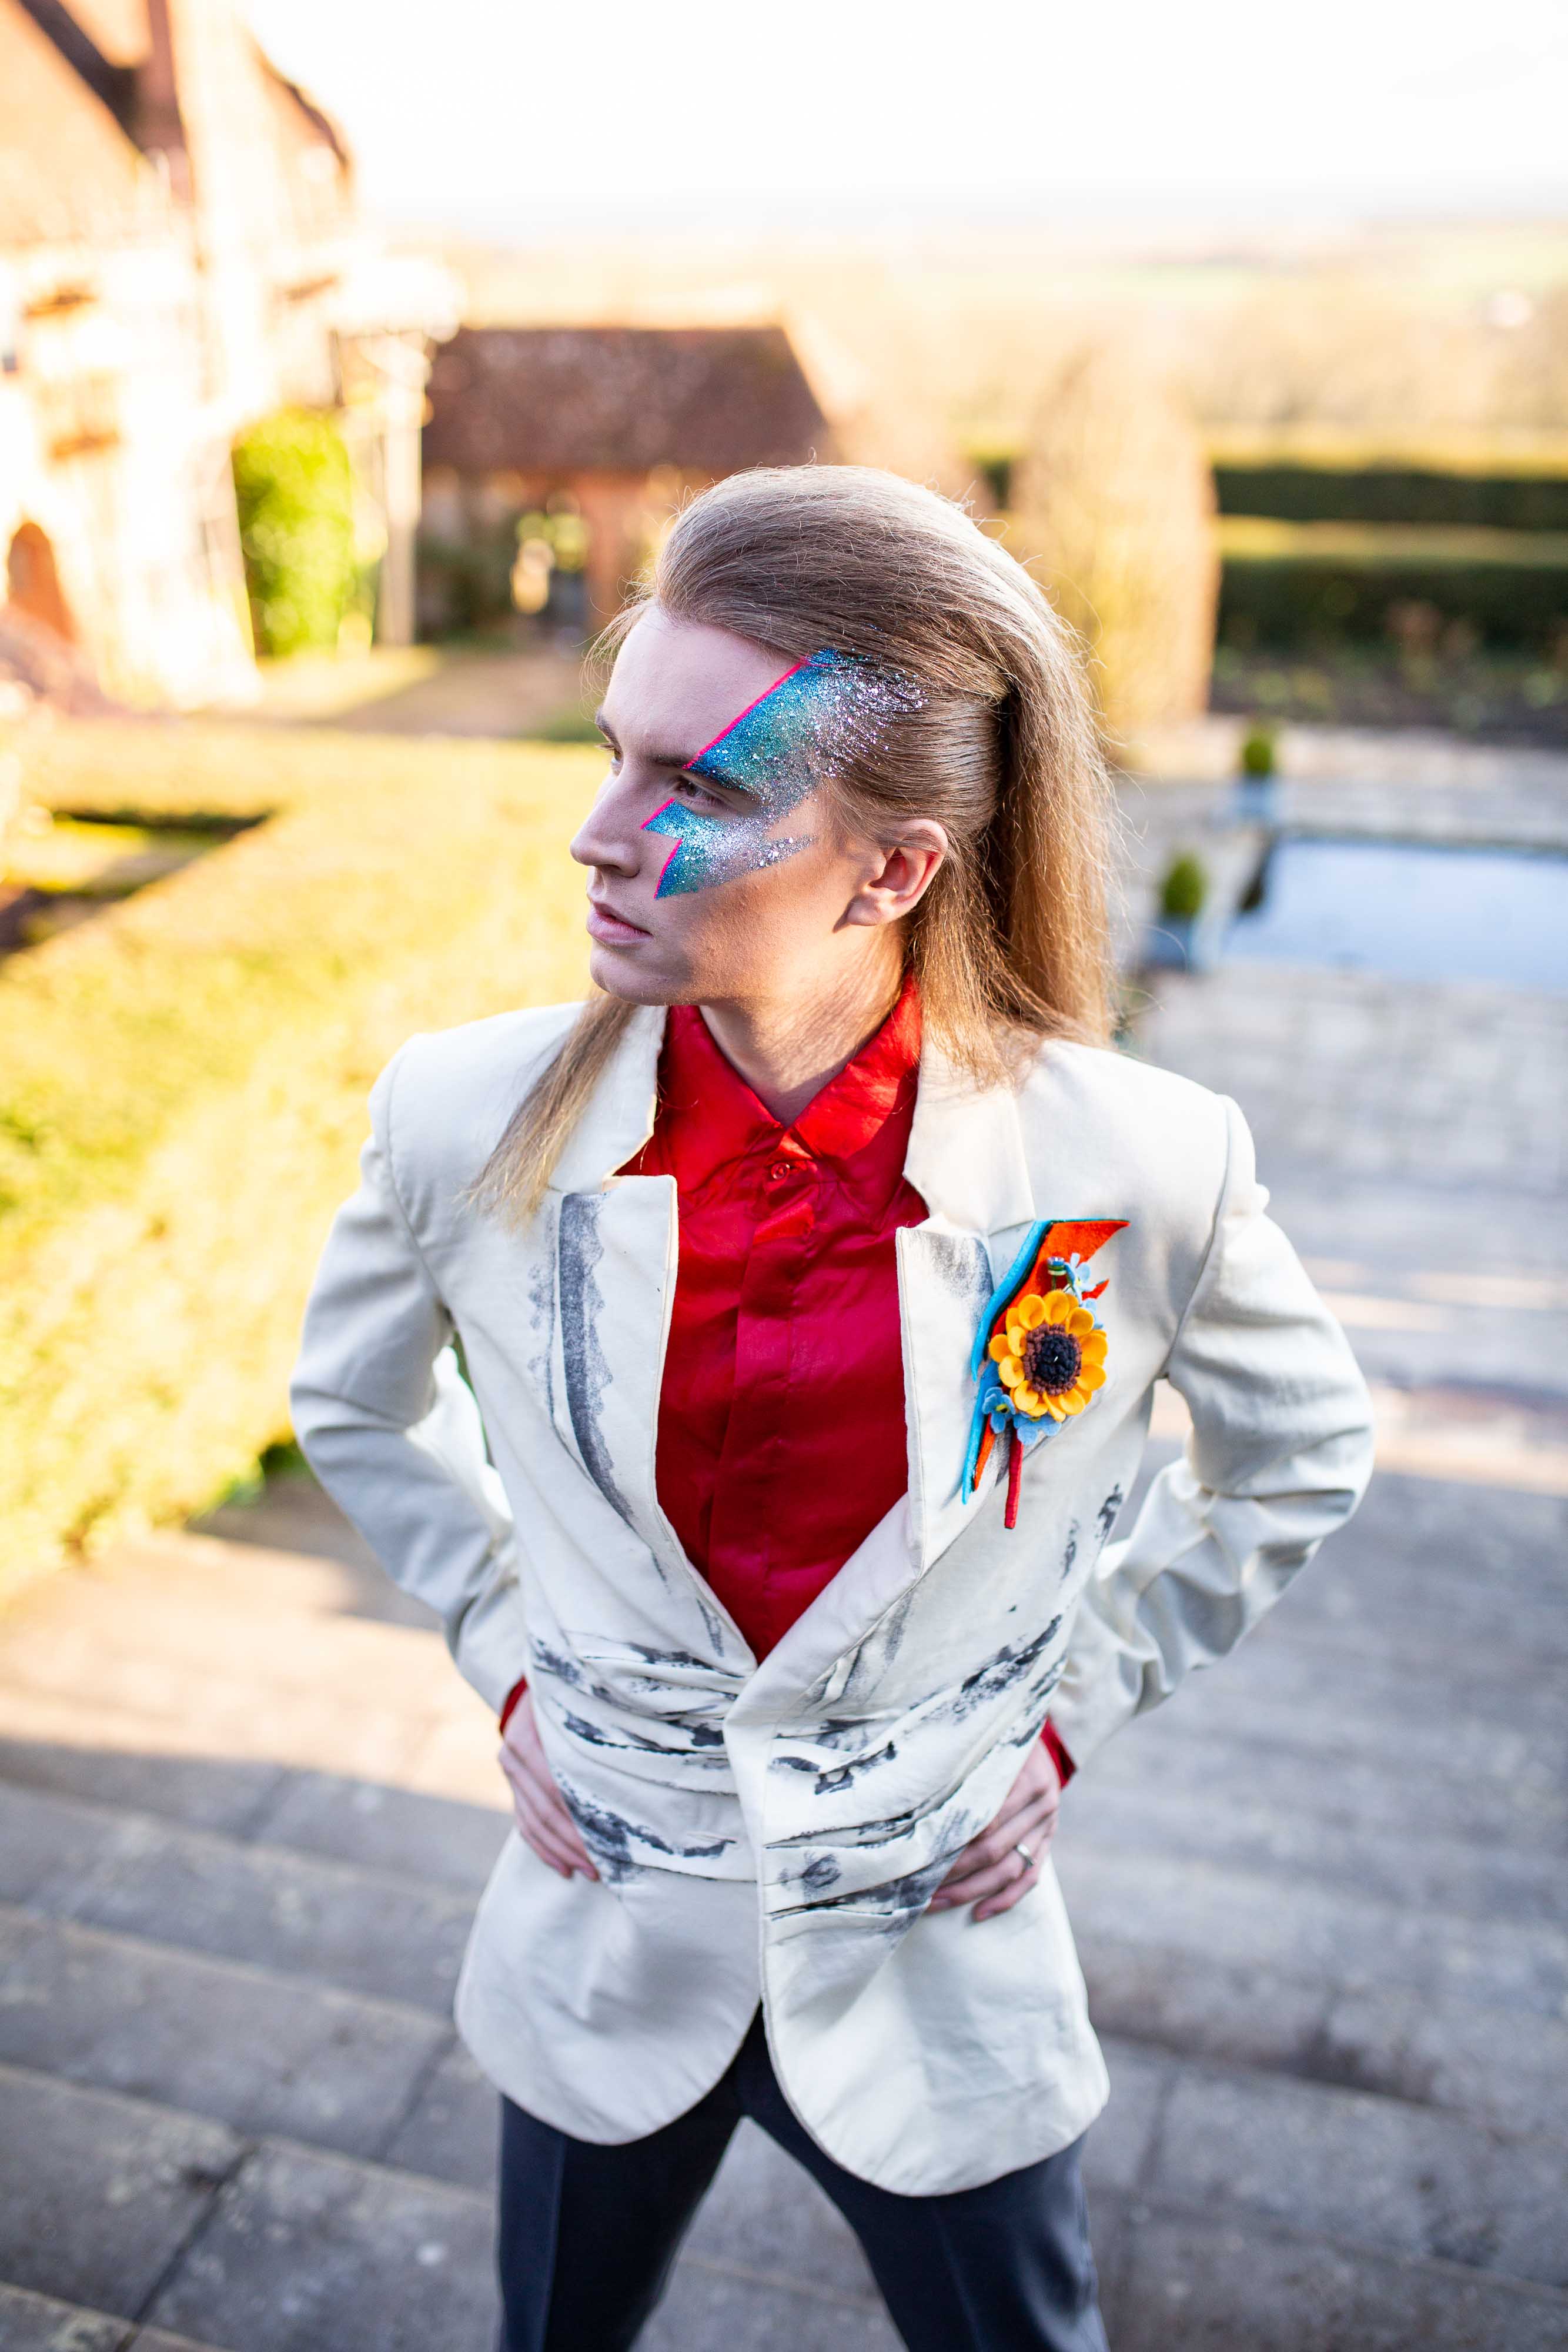 wedding menswear- alternative groomswear- music themed wedding- bake to the future- florence berry photography- davie bowie suit- eccentric wedding- starman wedding- davie bowie wedding